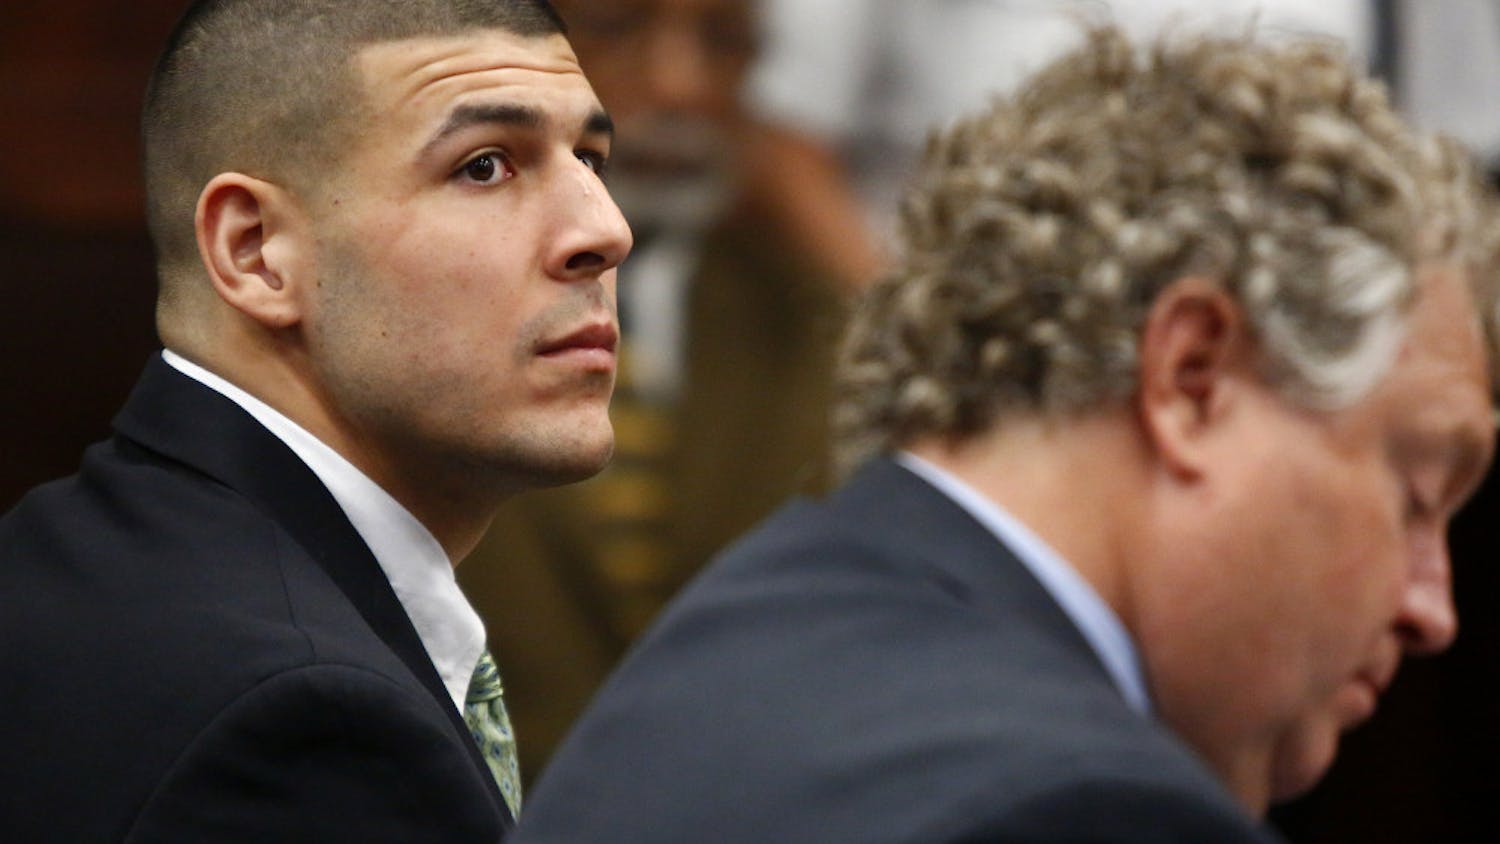 Former New England Patriots tight end Aaron Hernandez listens to the prosecution's summary of facts as he is arraigned on homicide charges at Suffolk Superior Court in Boston, Wednesday. Hernandez pleaded not guilty in the shooting deaths of Daniel de Abreu and Safiro Furtado. He already faces charges in the 2013 killing of semi-pro football player Odin Lloyd.